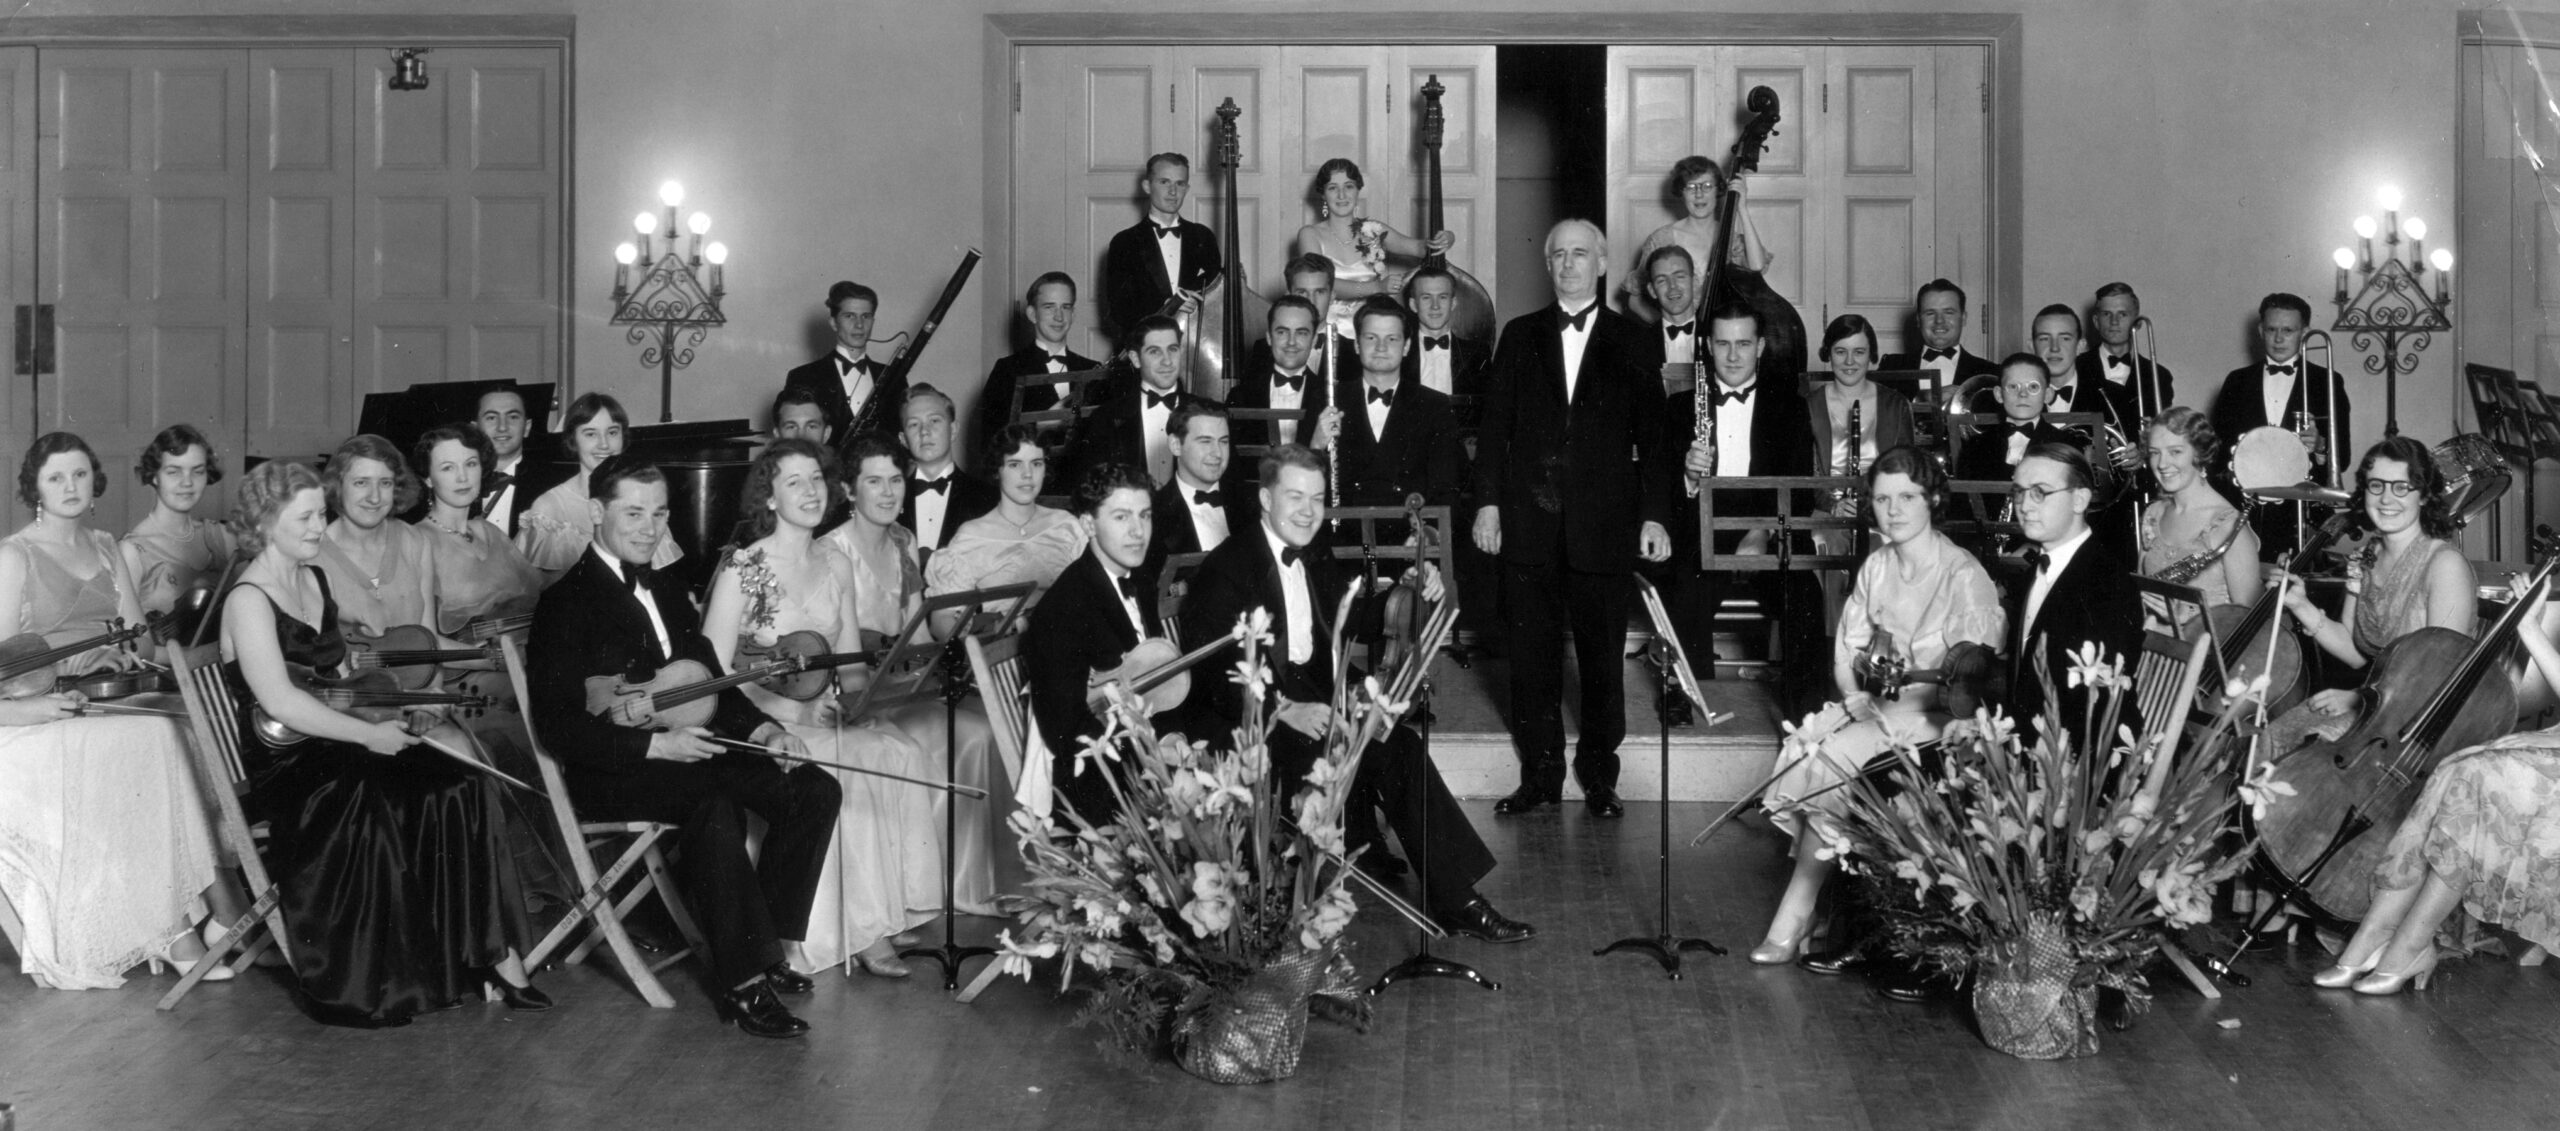 1932: Alexander Stewart conducts the USC Symphony Orchestra.